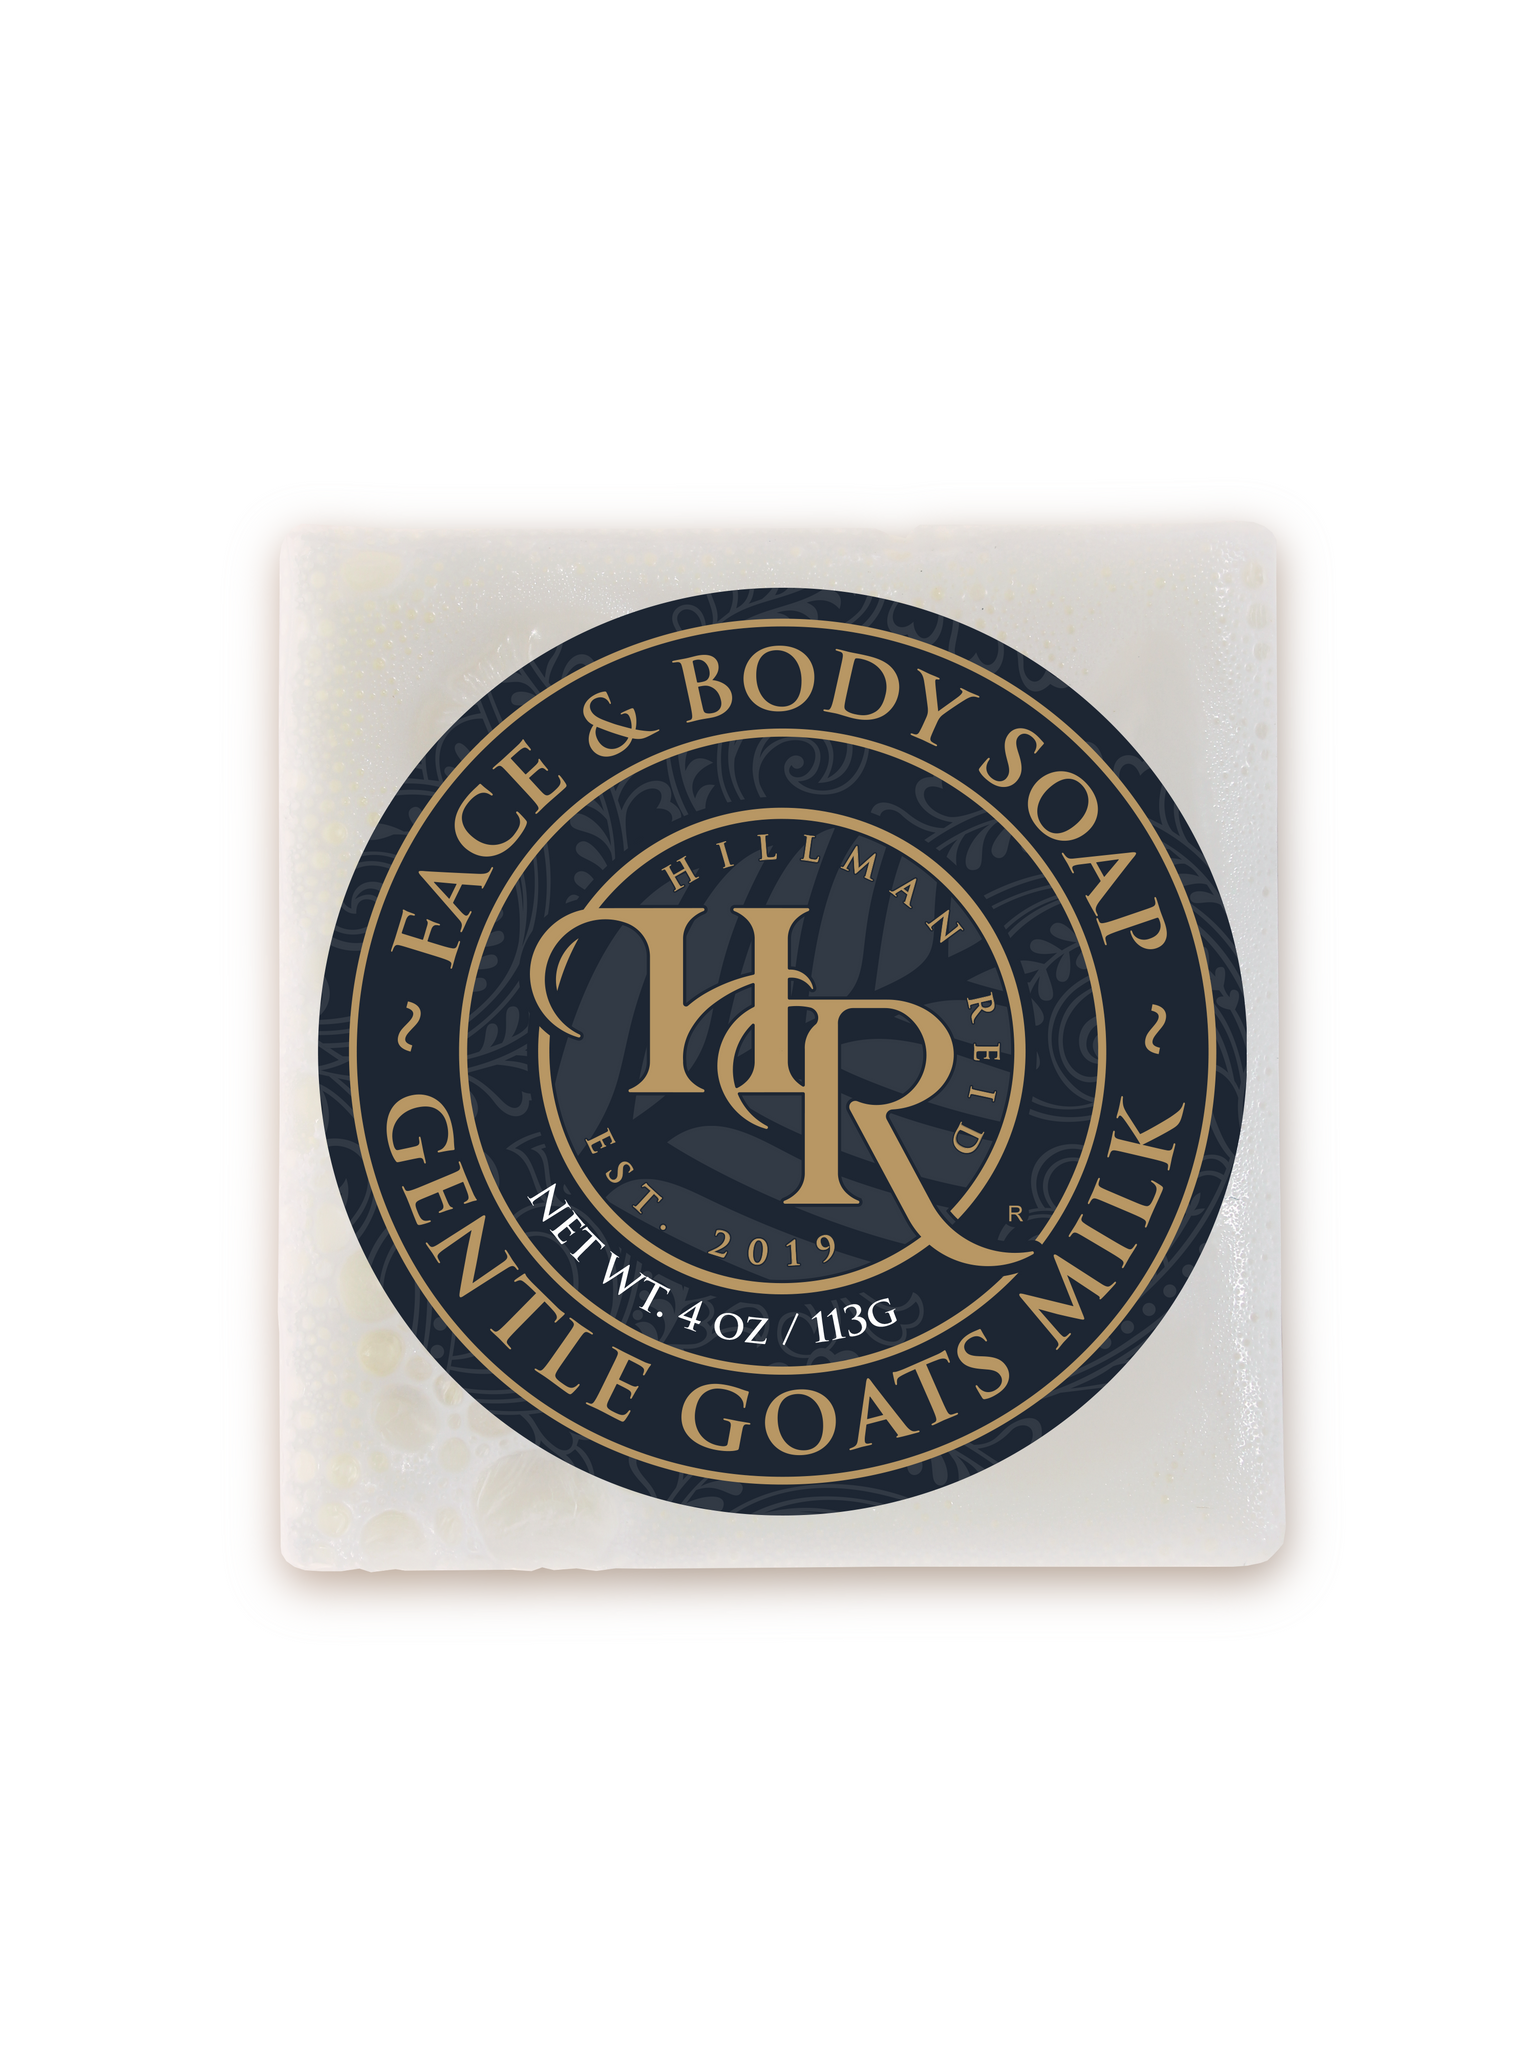 Goats Milk Face & Body Soap - What's Your Chic